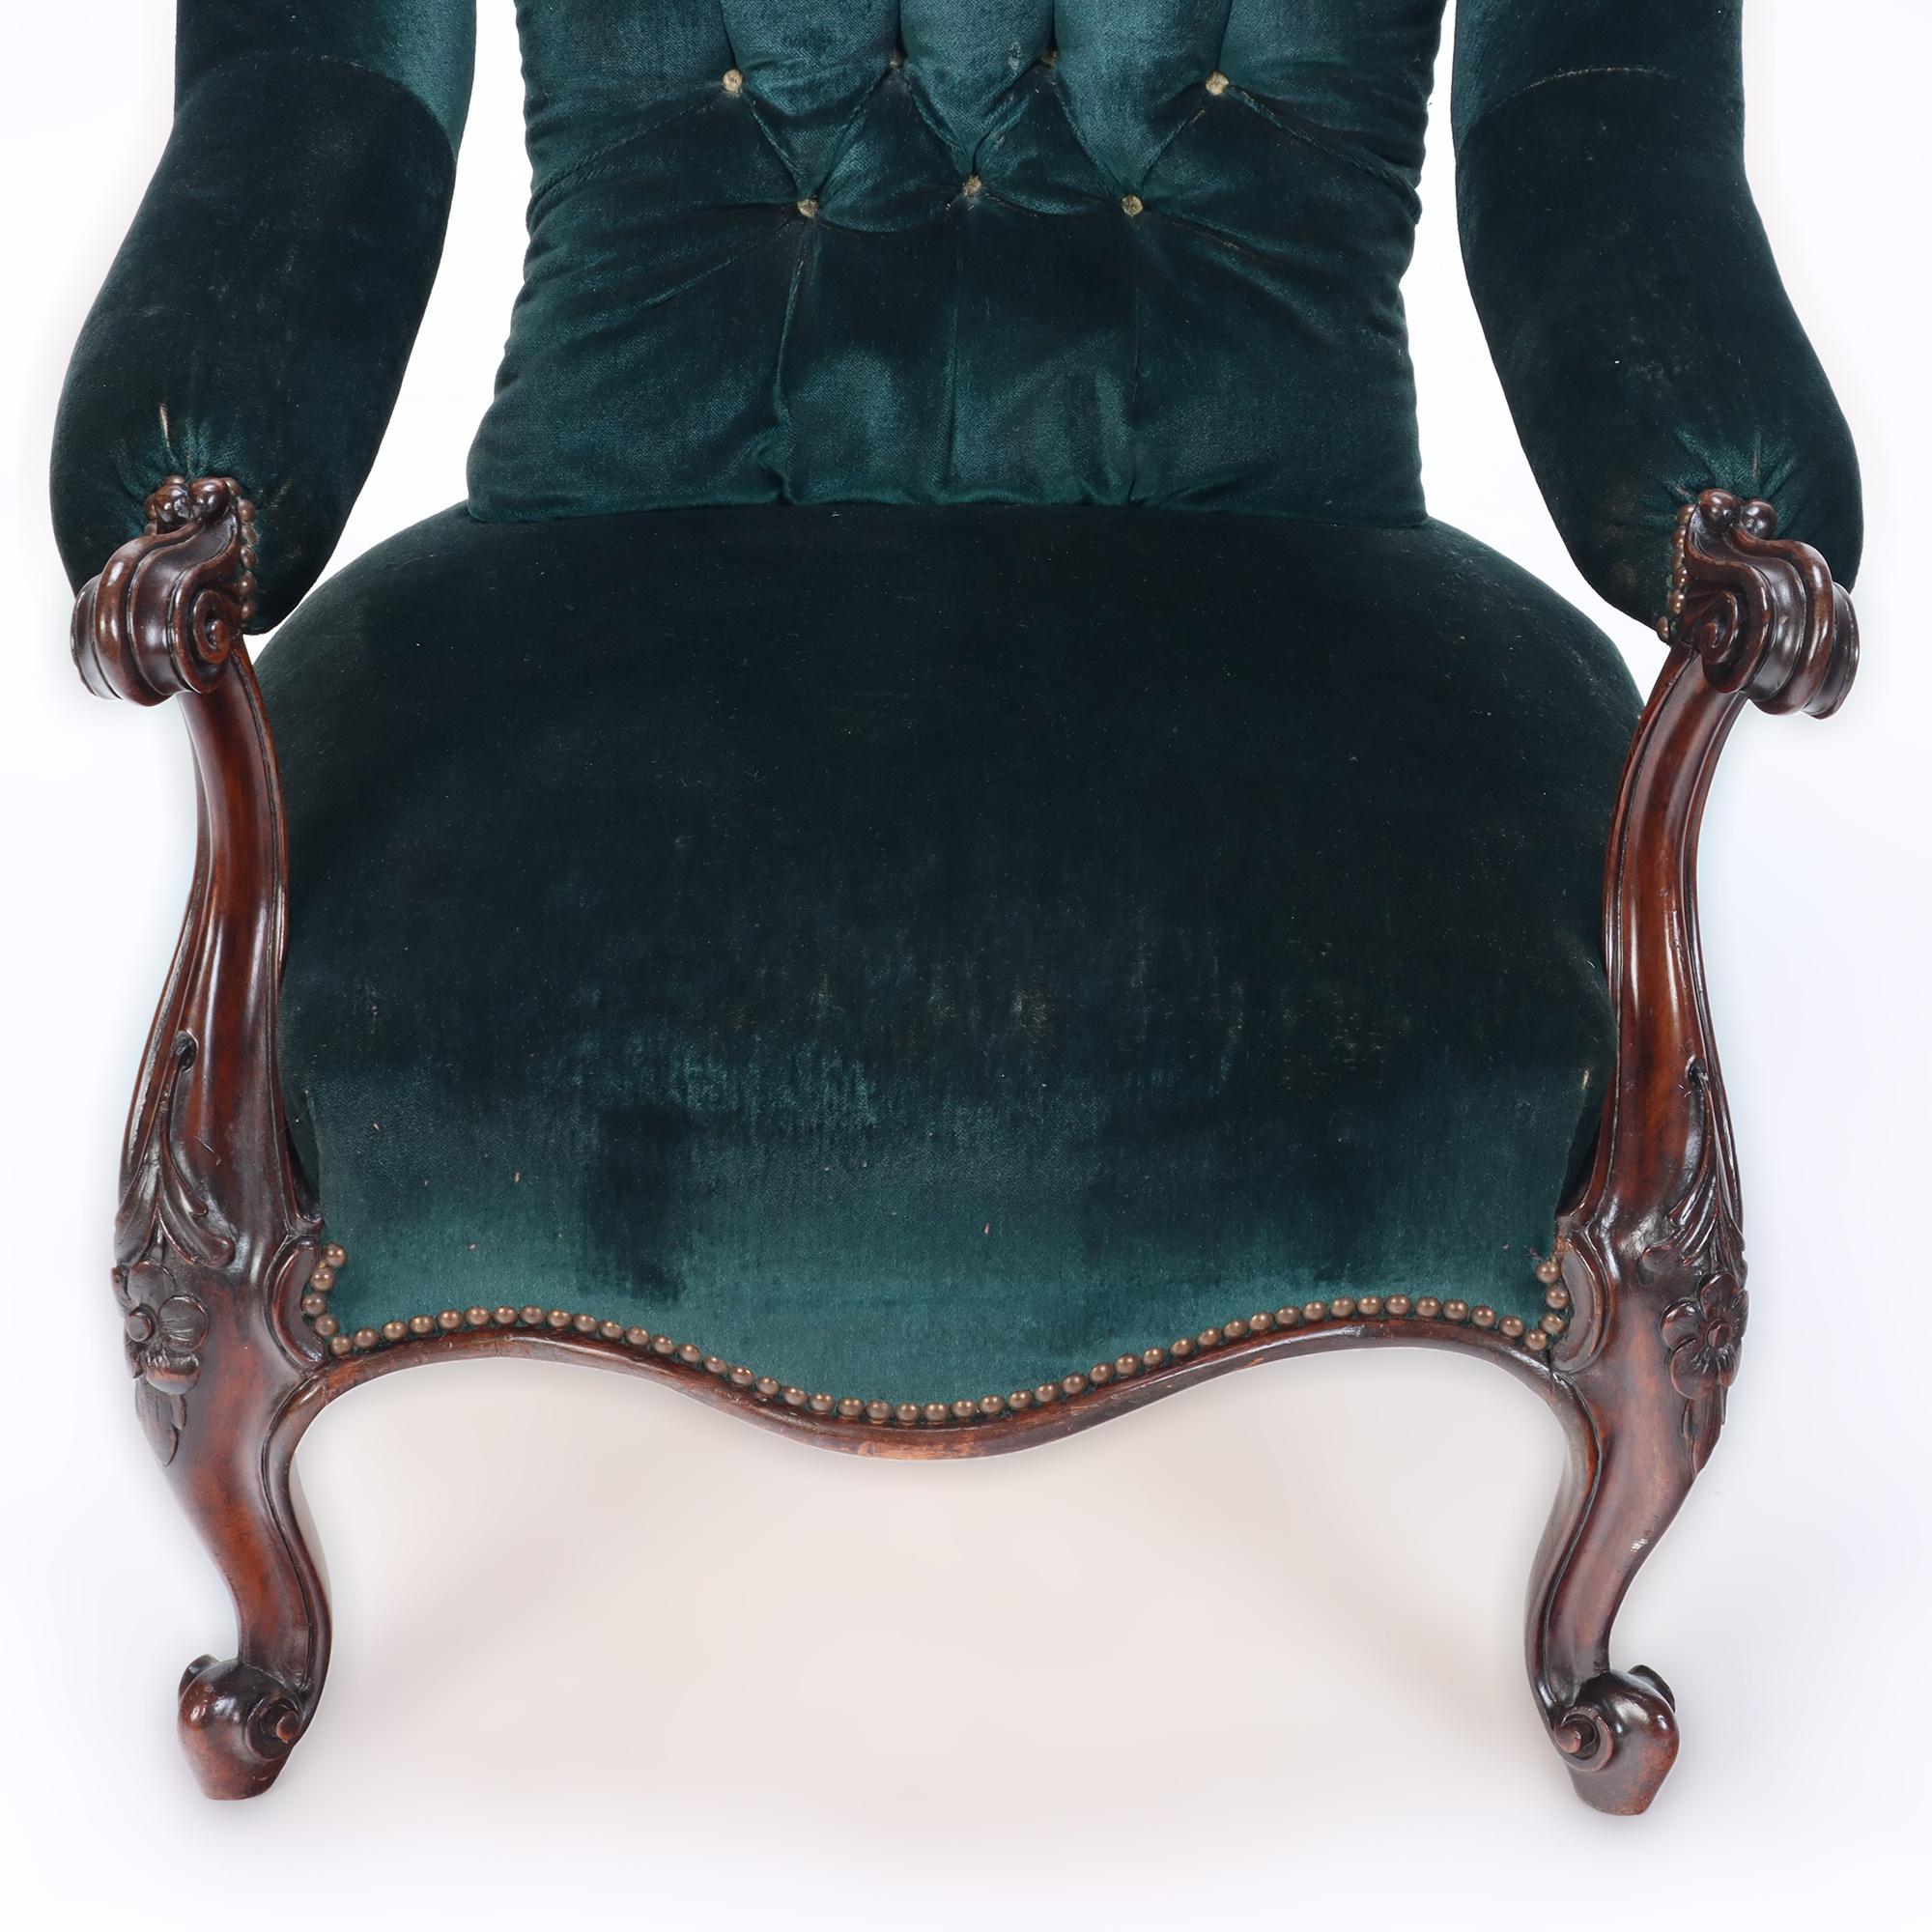 Upholstery Imposing Velvet Upholstered Library Armchair with Continuous Arm, 19th C. For Sale